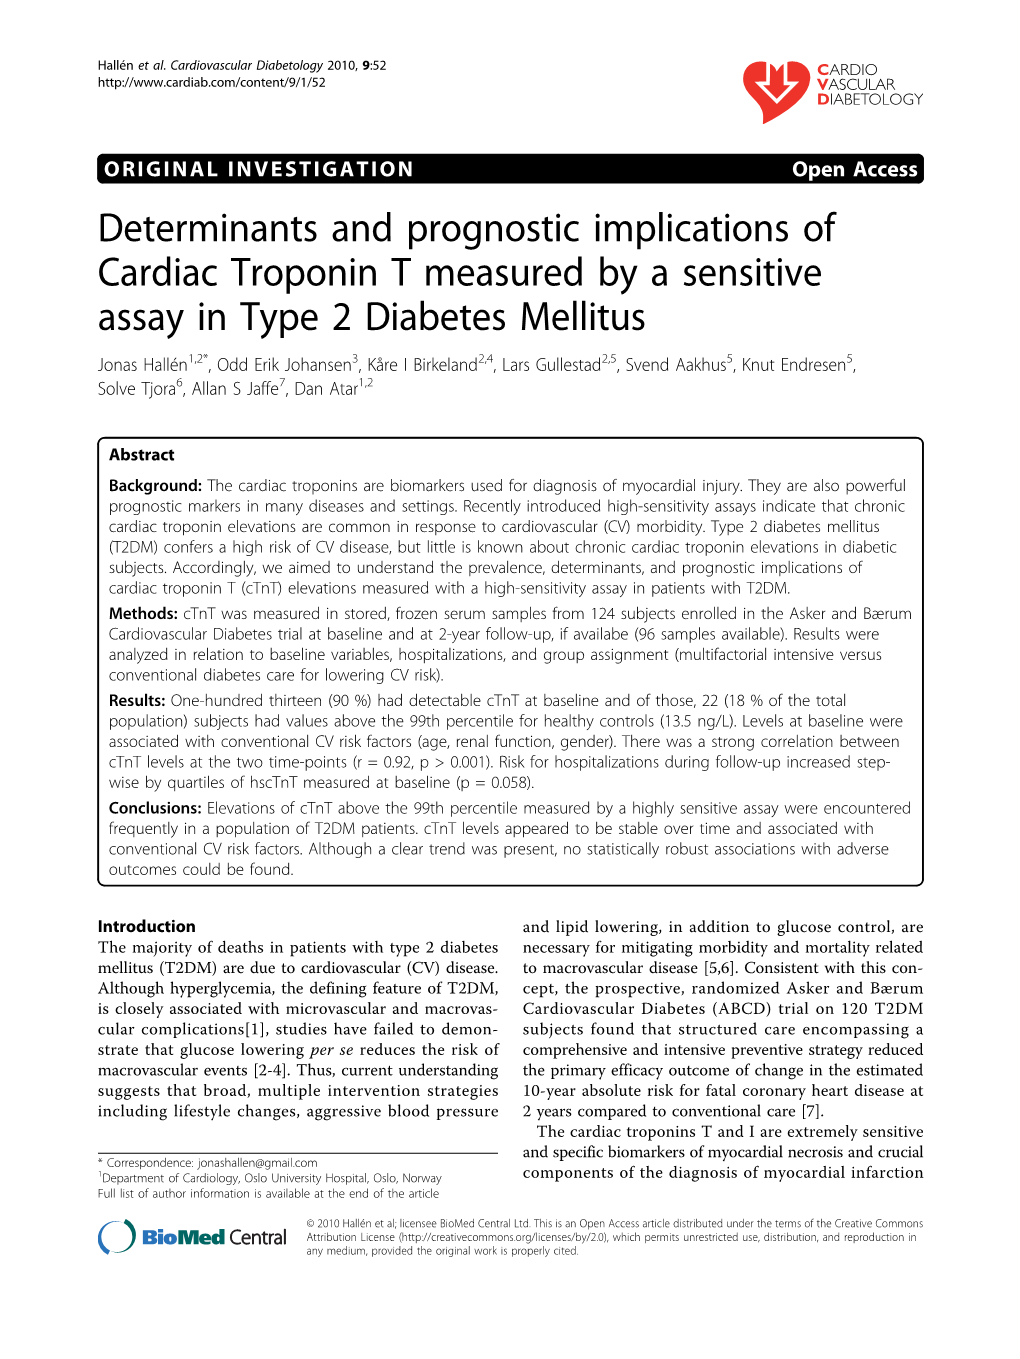 Determinants and Prognostic Implications Of